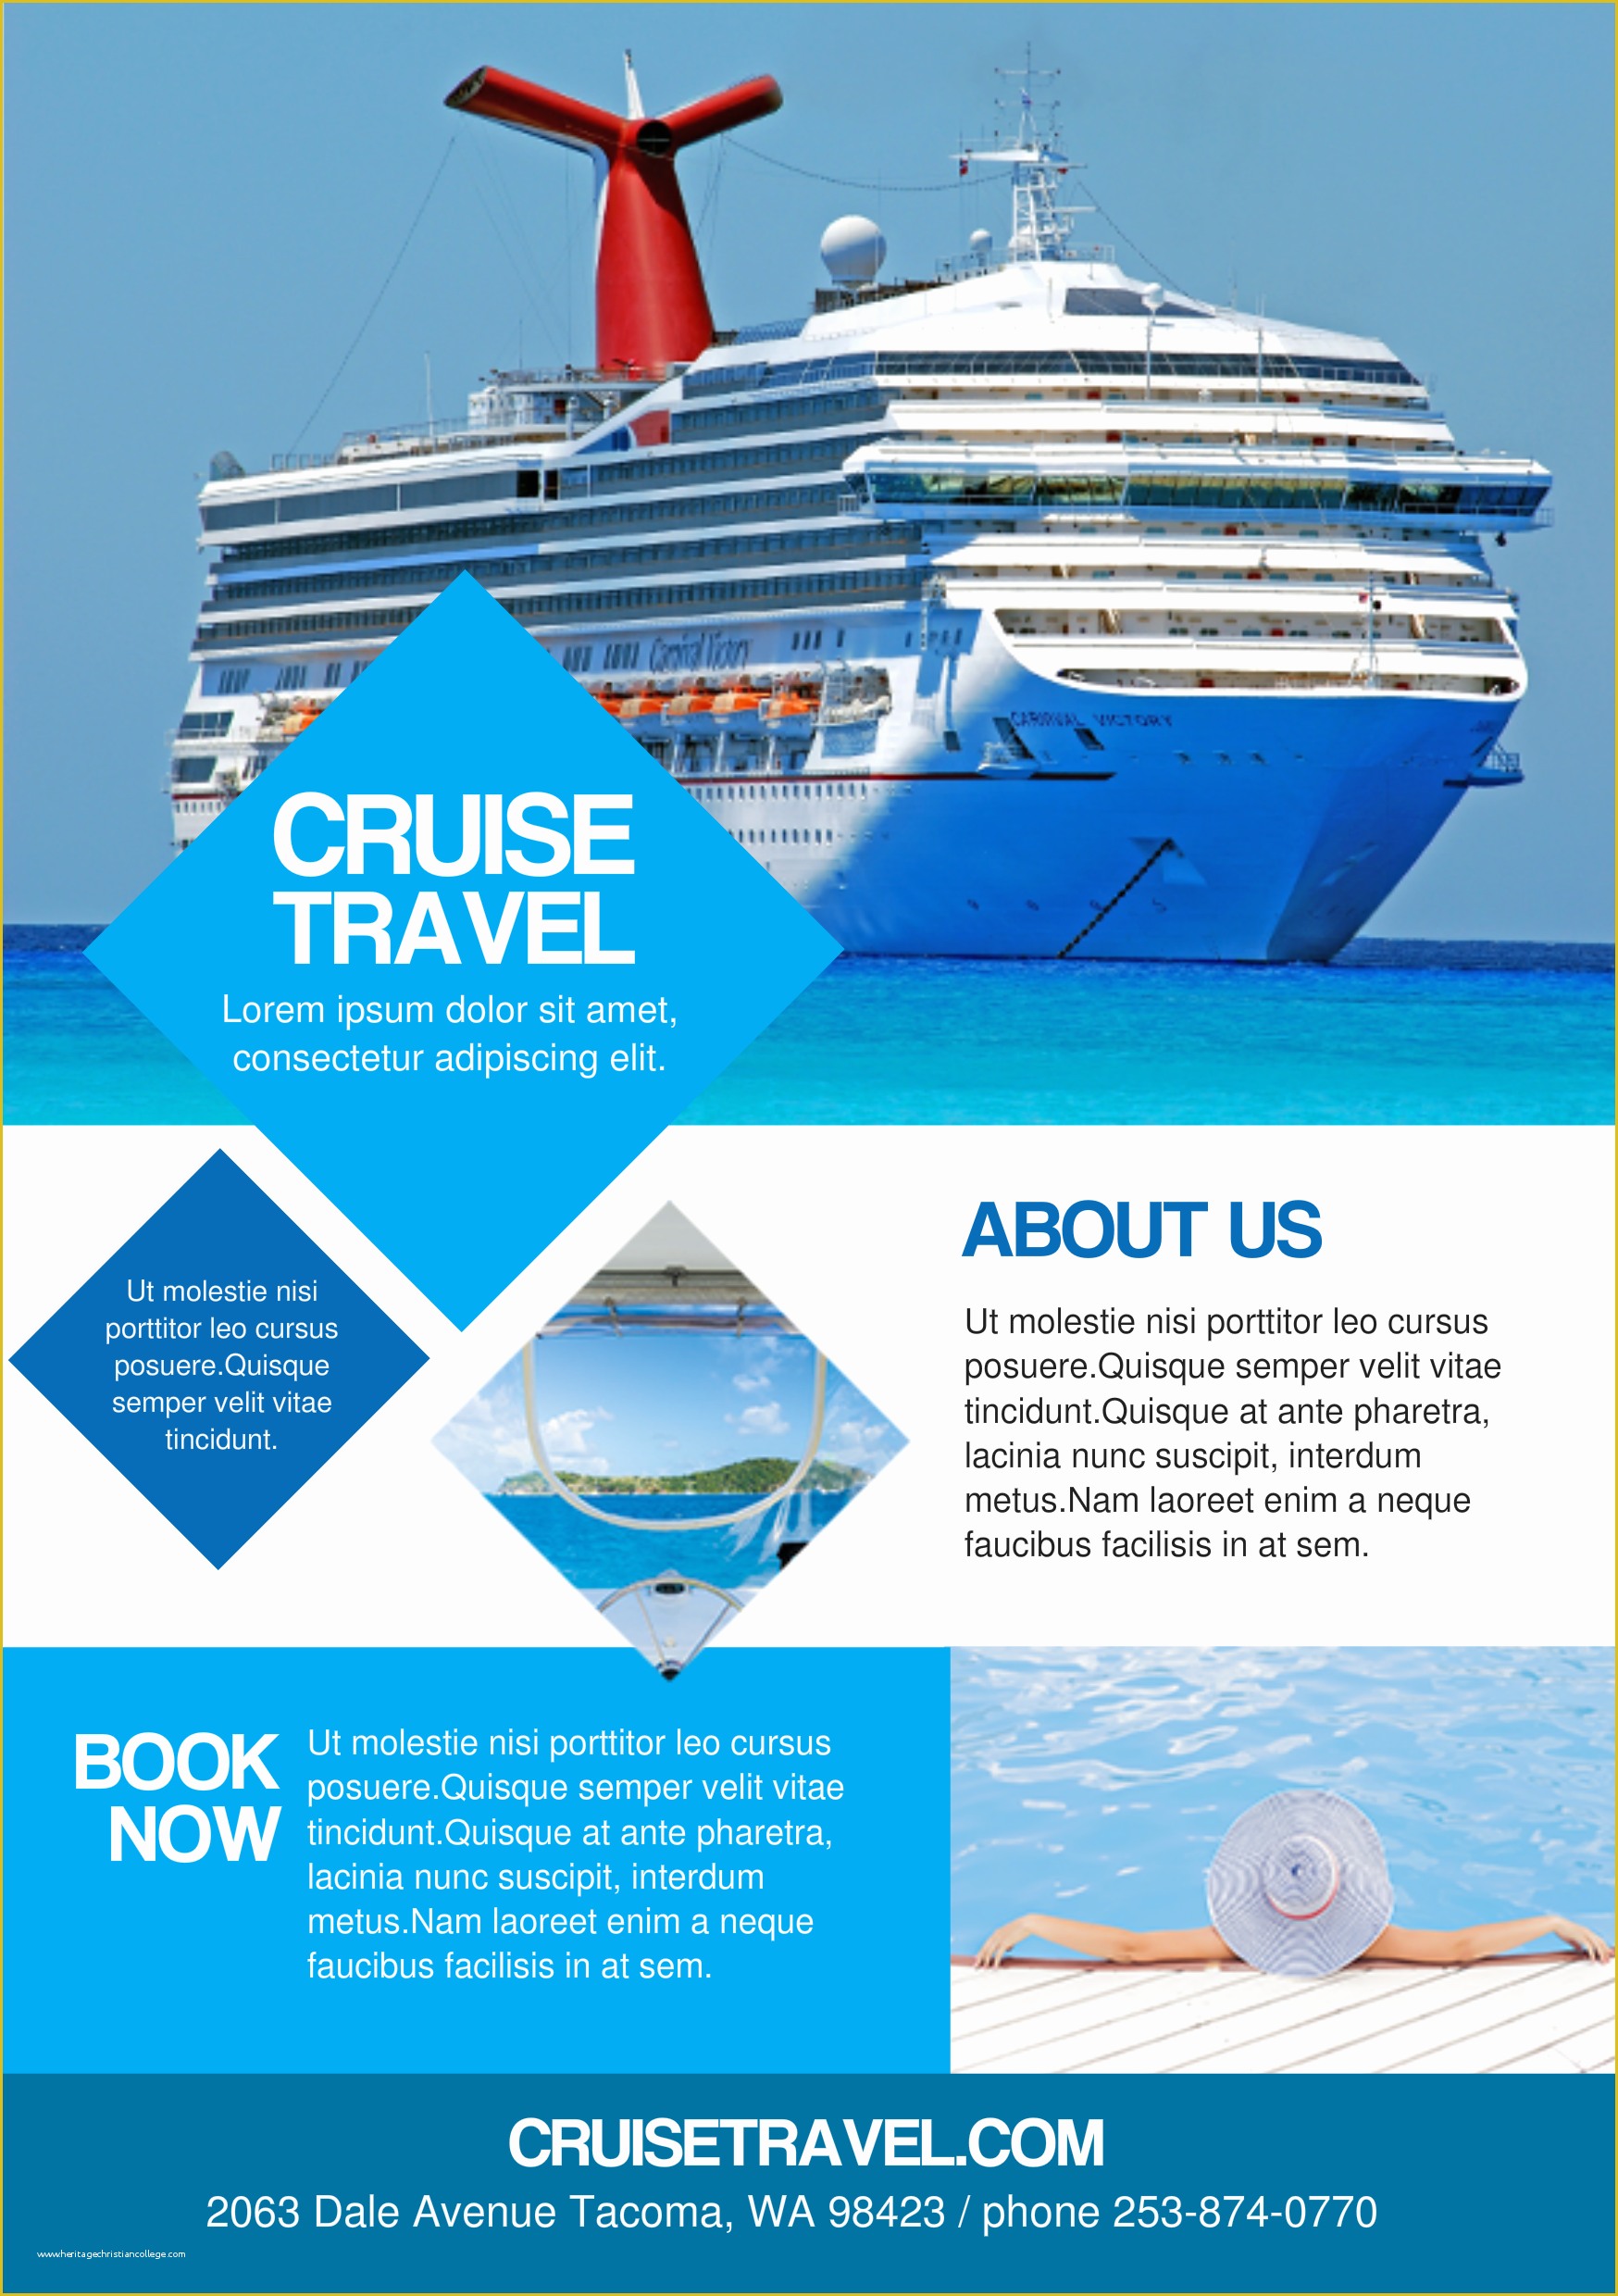 Free Cruise Ship Flyer Template Of Cruise Travel A Promotional Flyer Http Premadevideos and